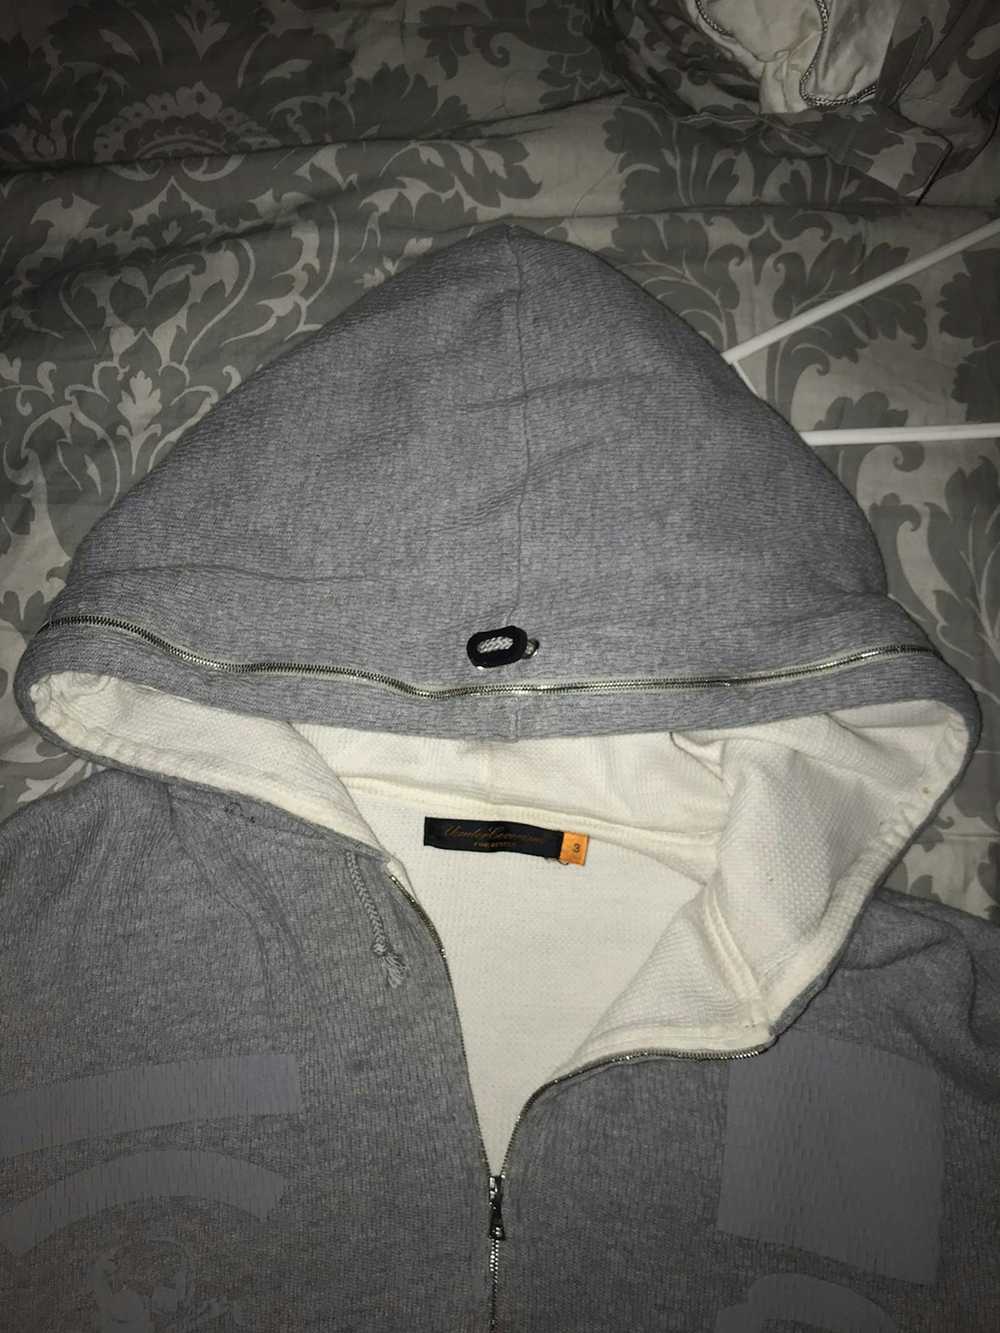 Undercover undercover hoodie - image 1